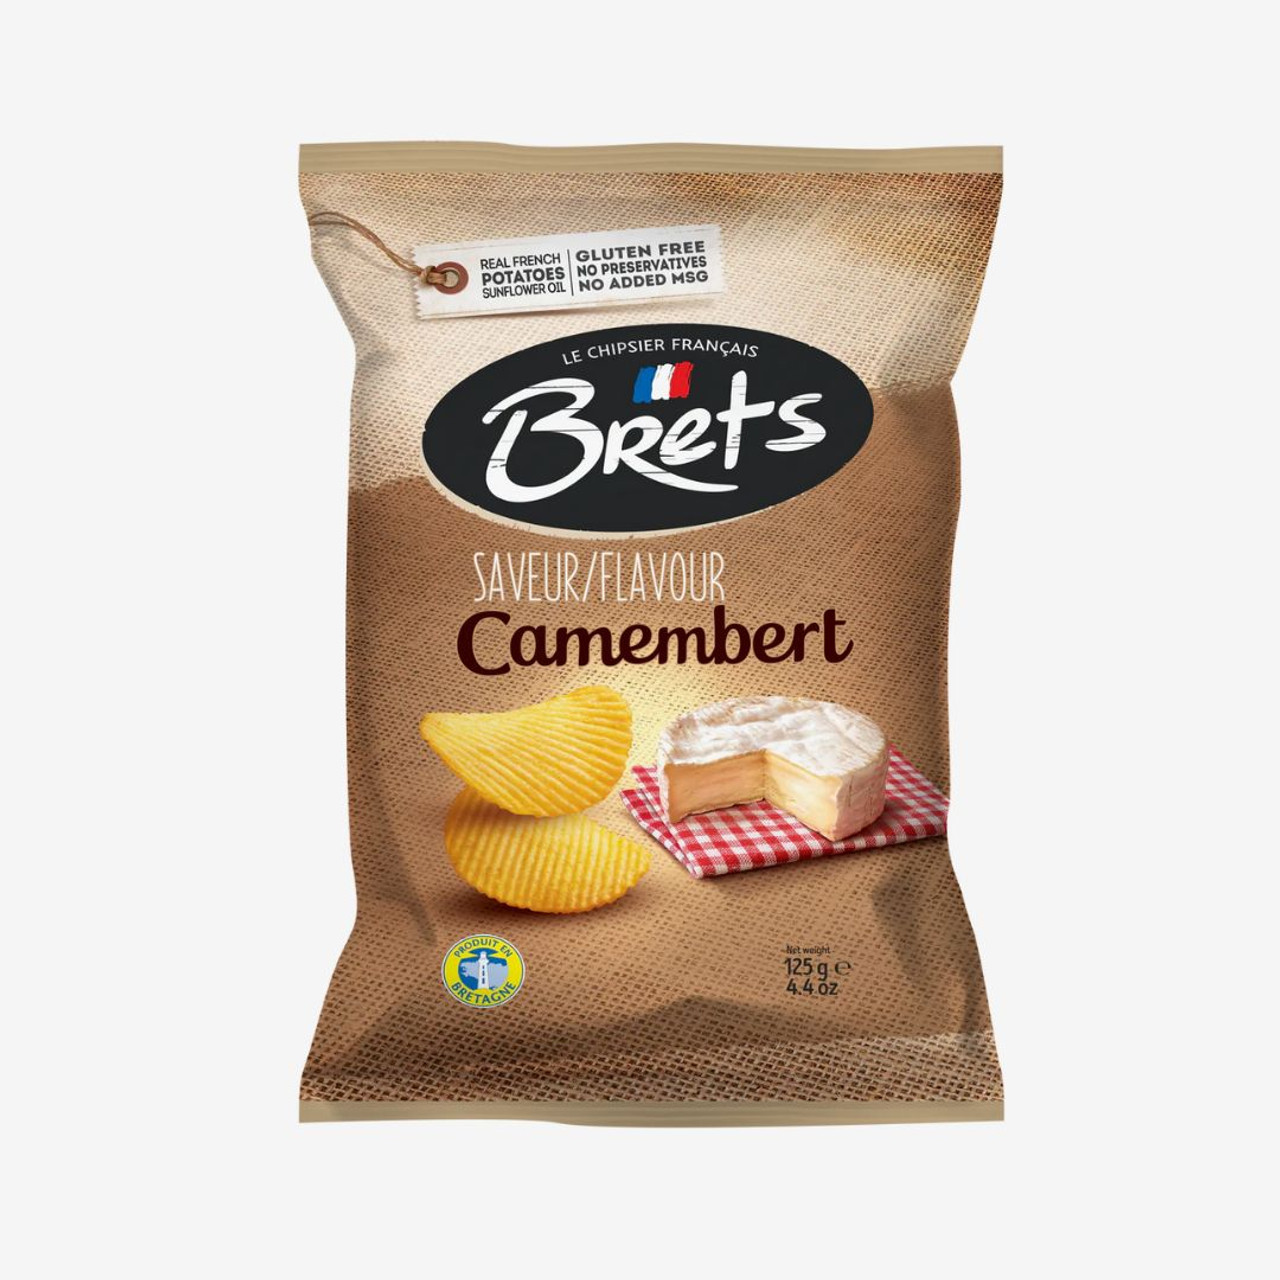 Introducing Brets, the all-natural, premium chips are now available! –  Deliss Artisan